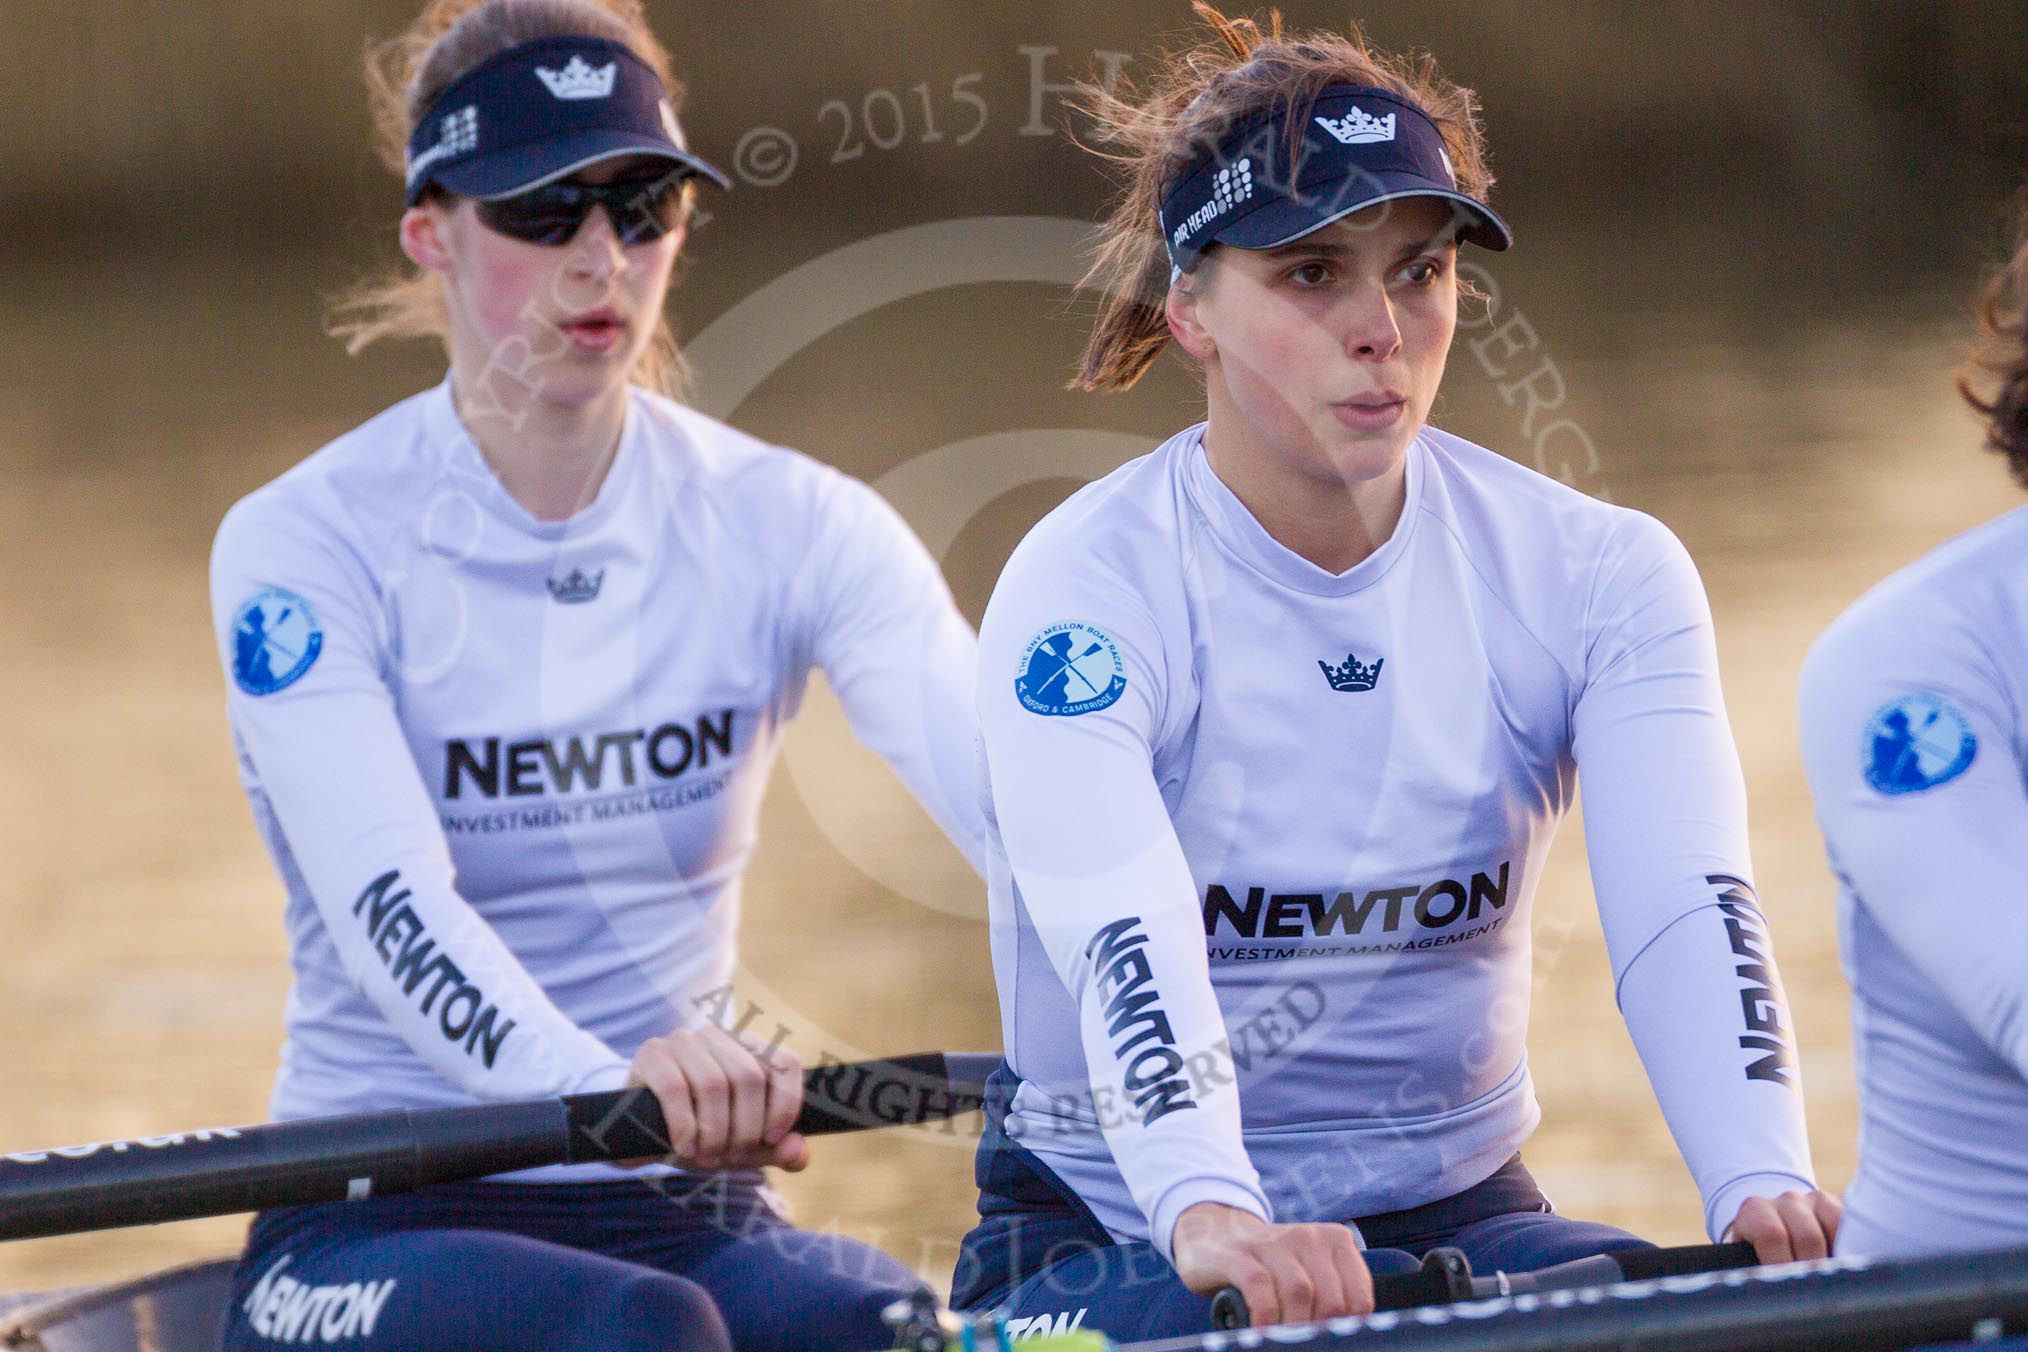 The Boat Race season 2015: OUWBC training Wallingford.

Wallingford,

United Kingdom,
on 04 March 2015 at 17:18, image #299